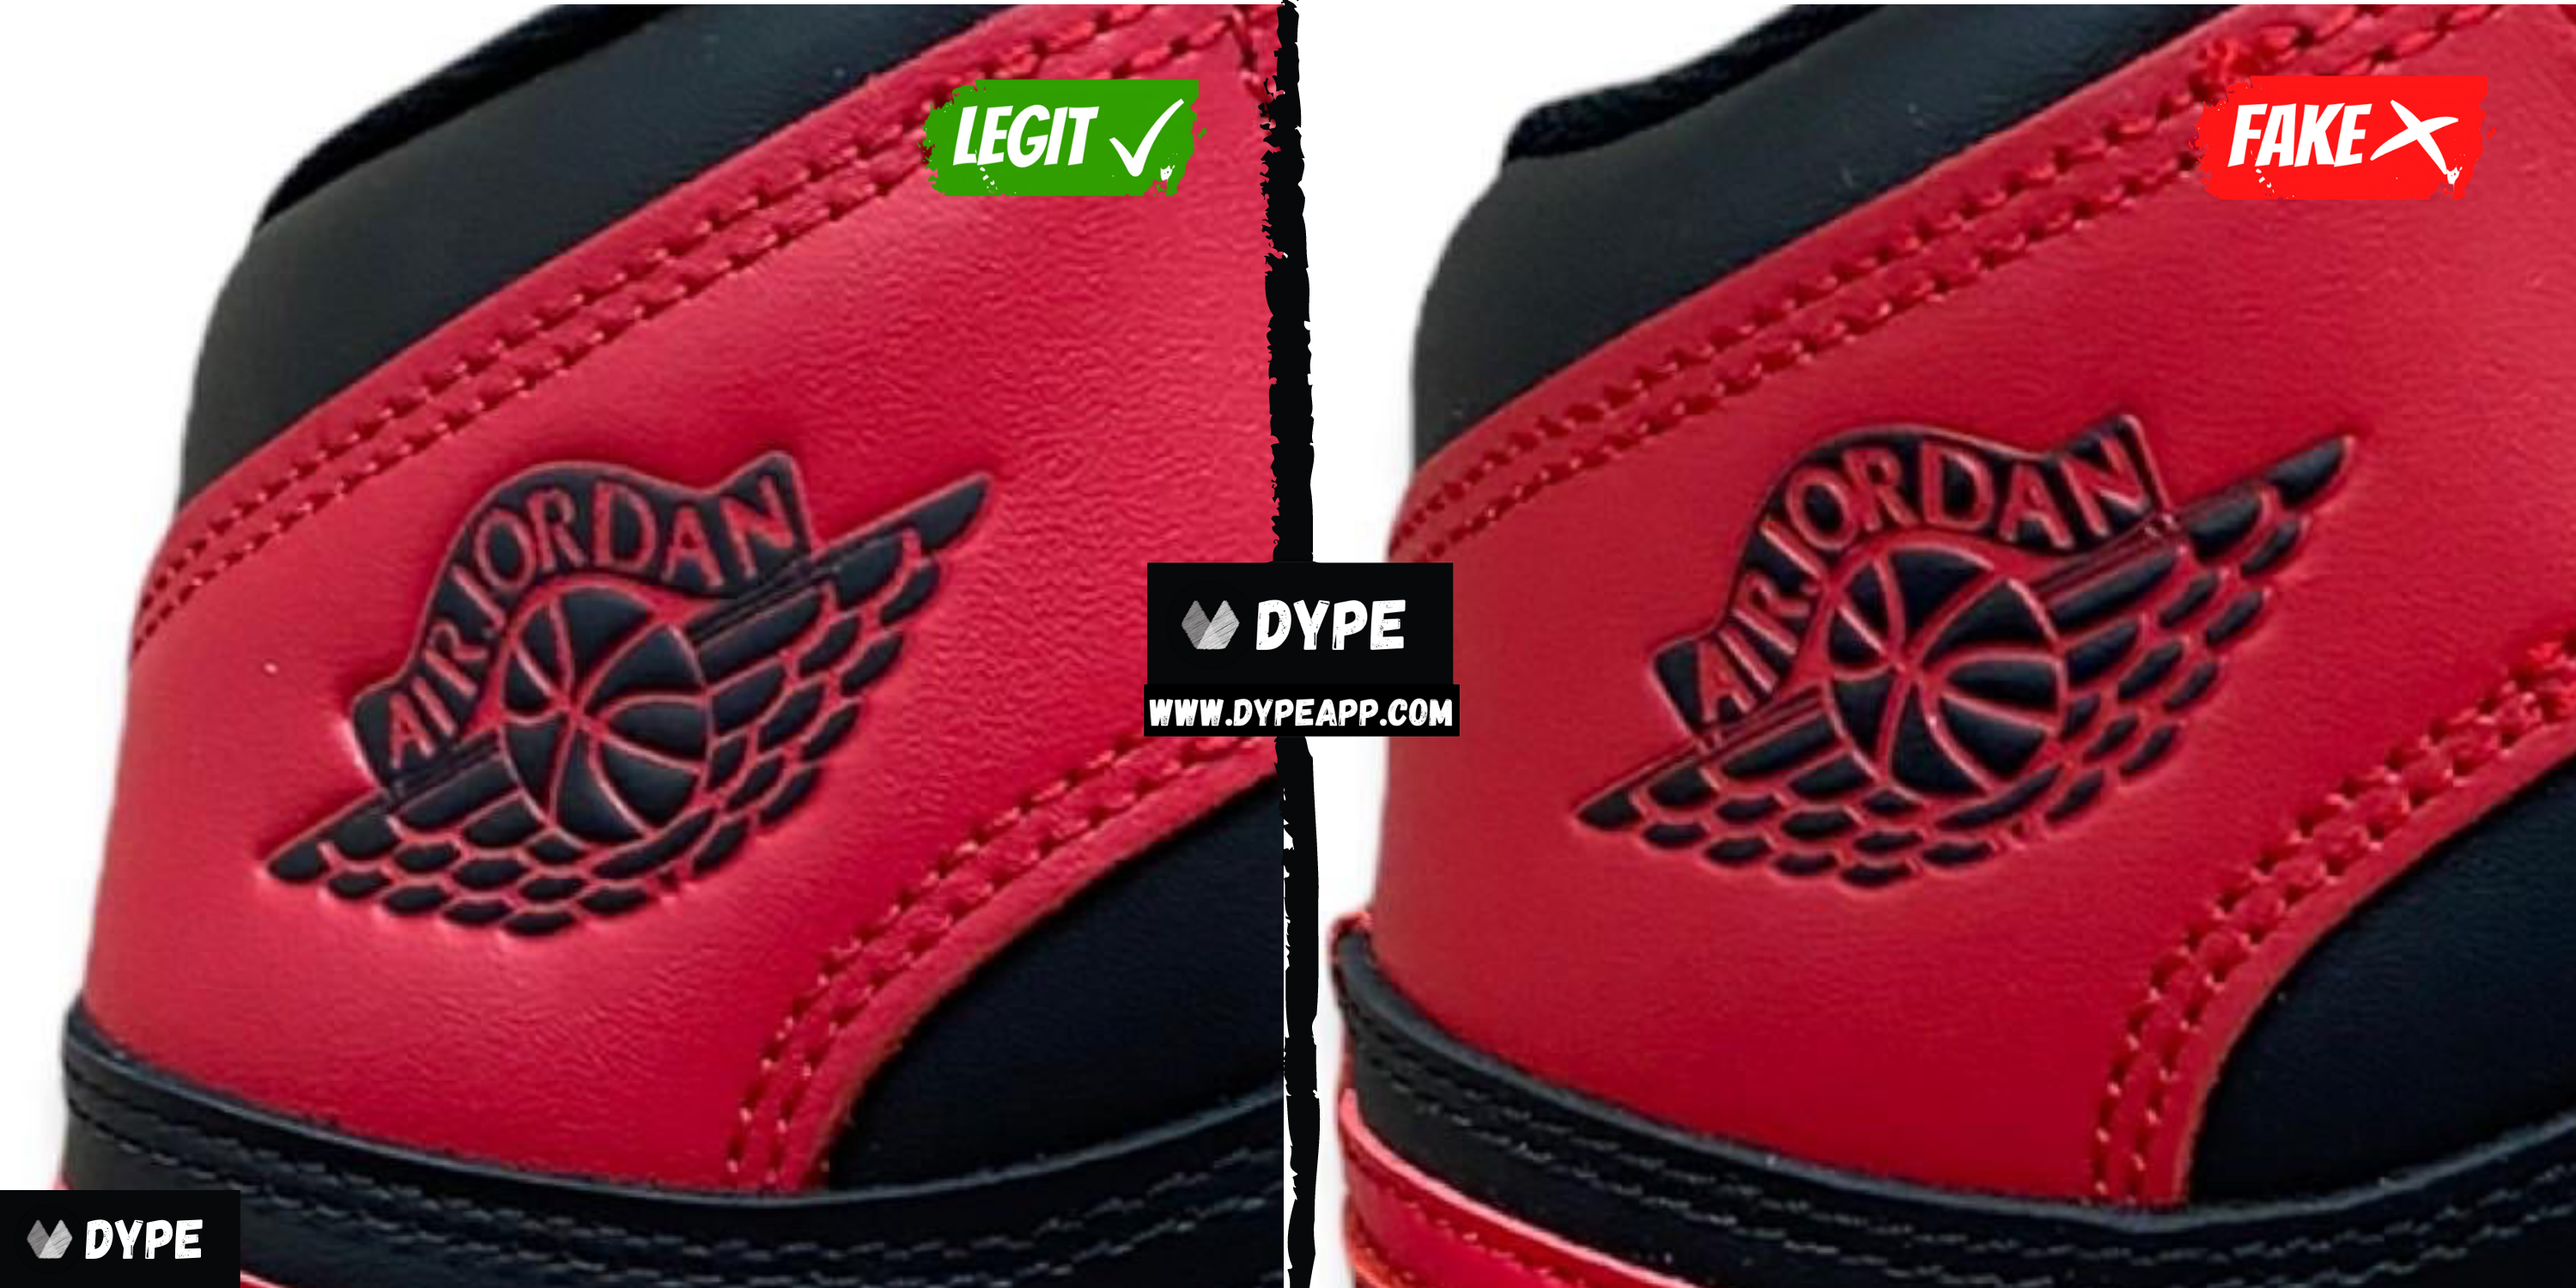 how to tell if the jordan 1s are fake